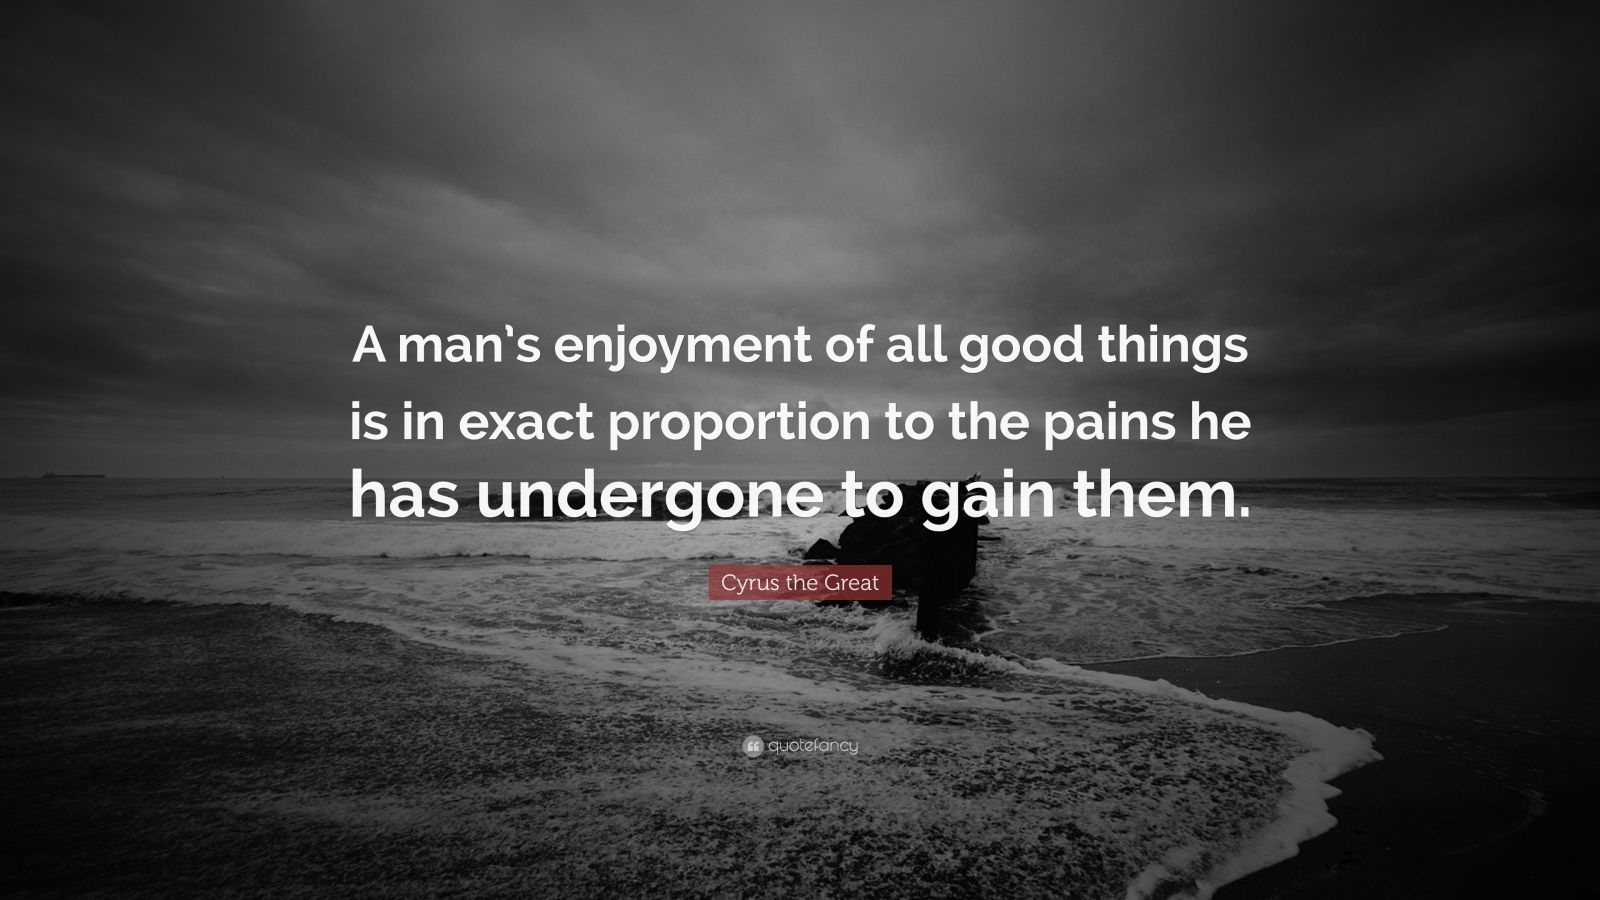 Cyrus the Great Quote: "A man's enjoyment of all good things is in exact proportion to the pains ...